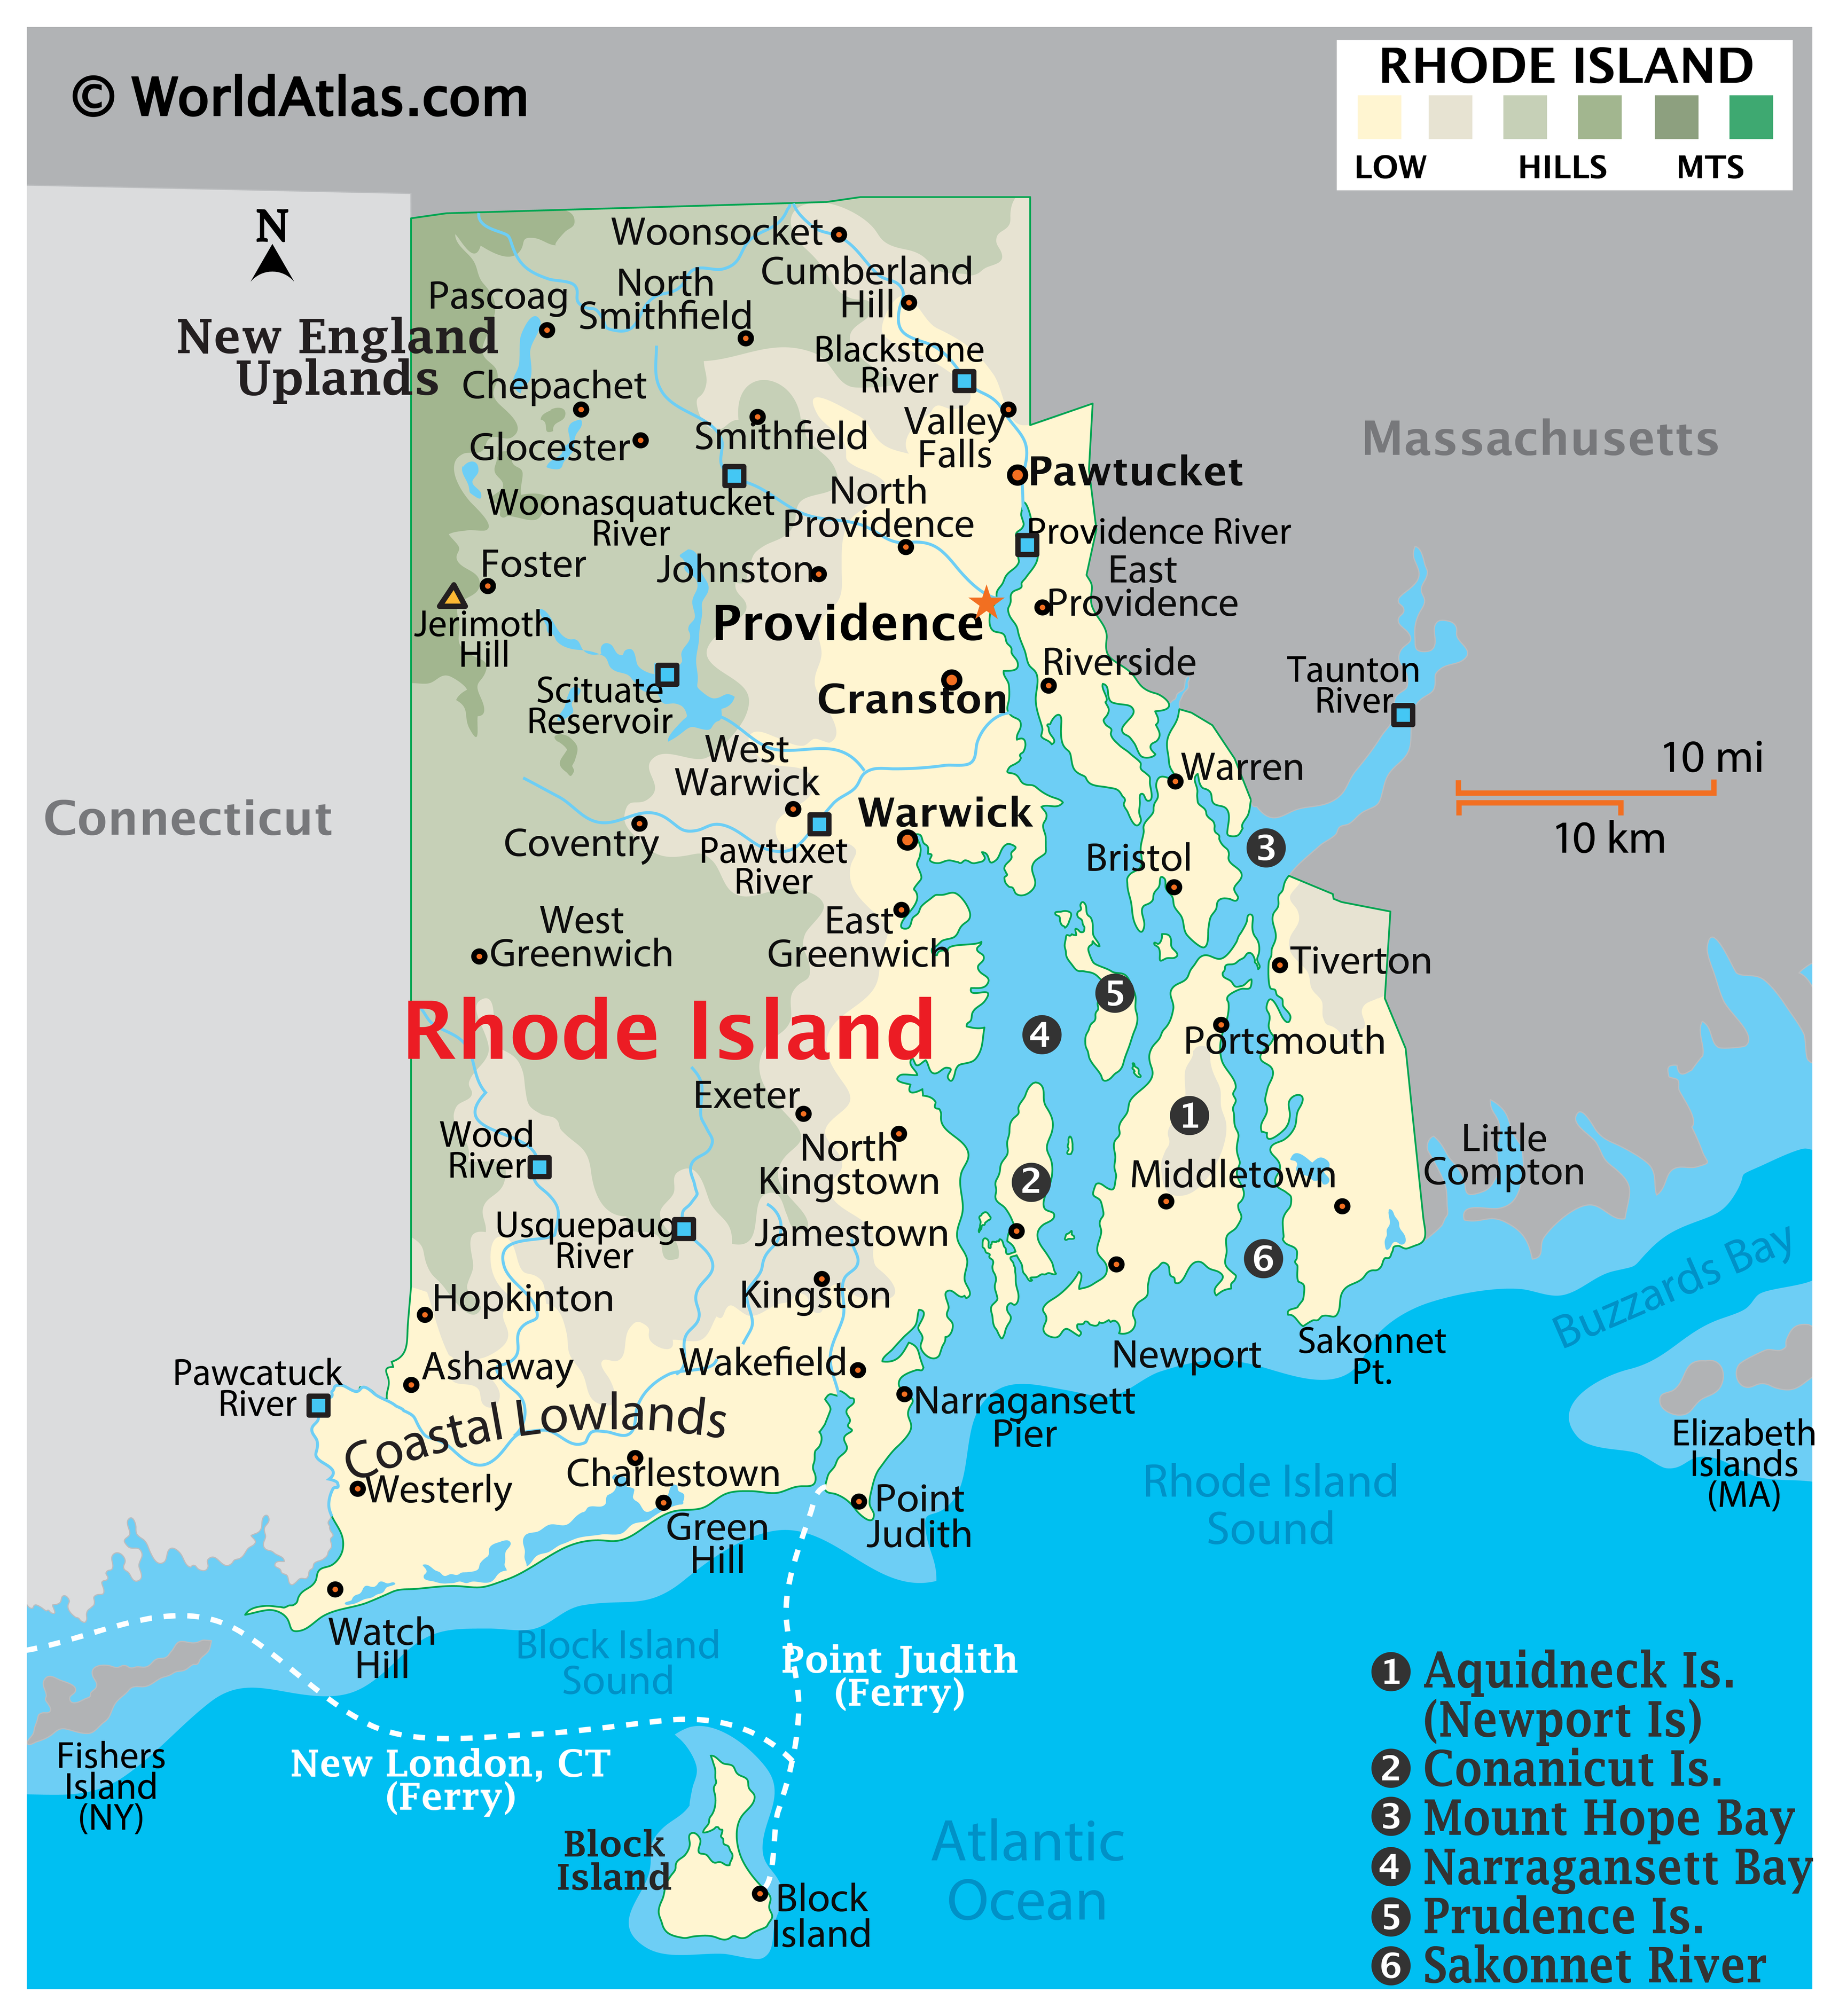 Image of a map of the state of Rhode Island. Different cities are labeled on the map.